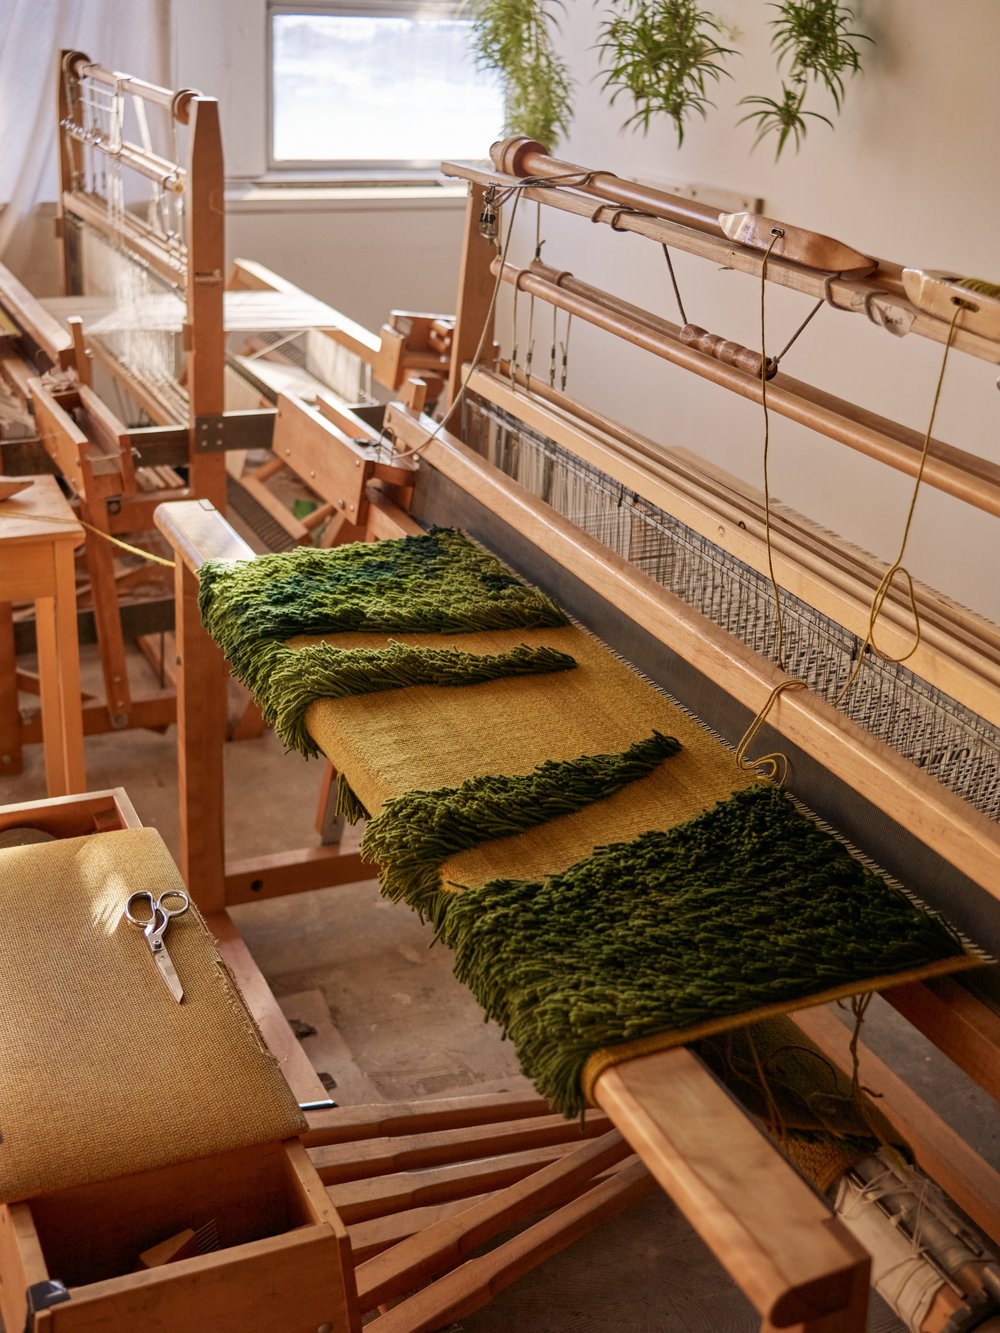 A loom in Sandy Lamb’s studio, photo courtesy of Tanner Gooding